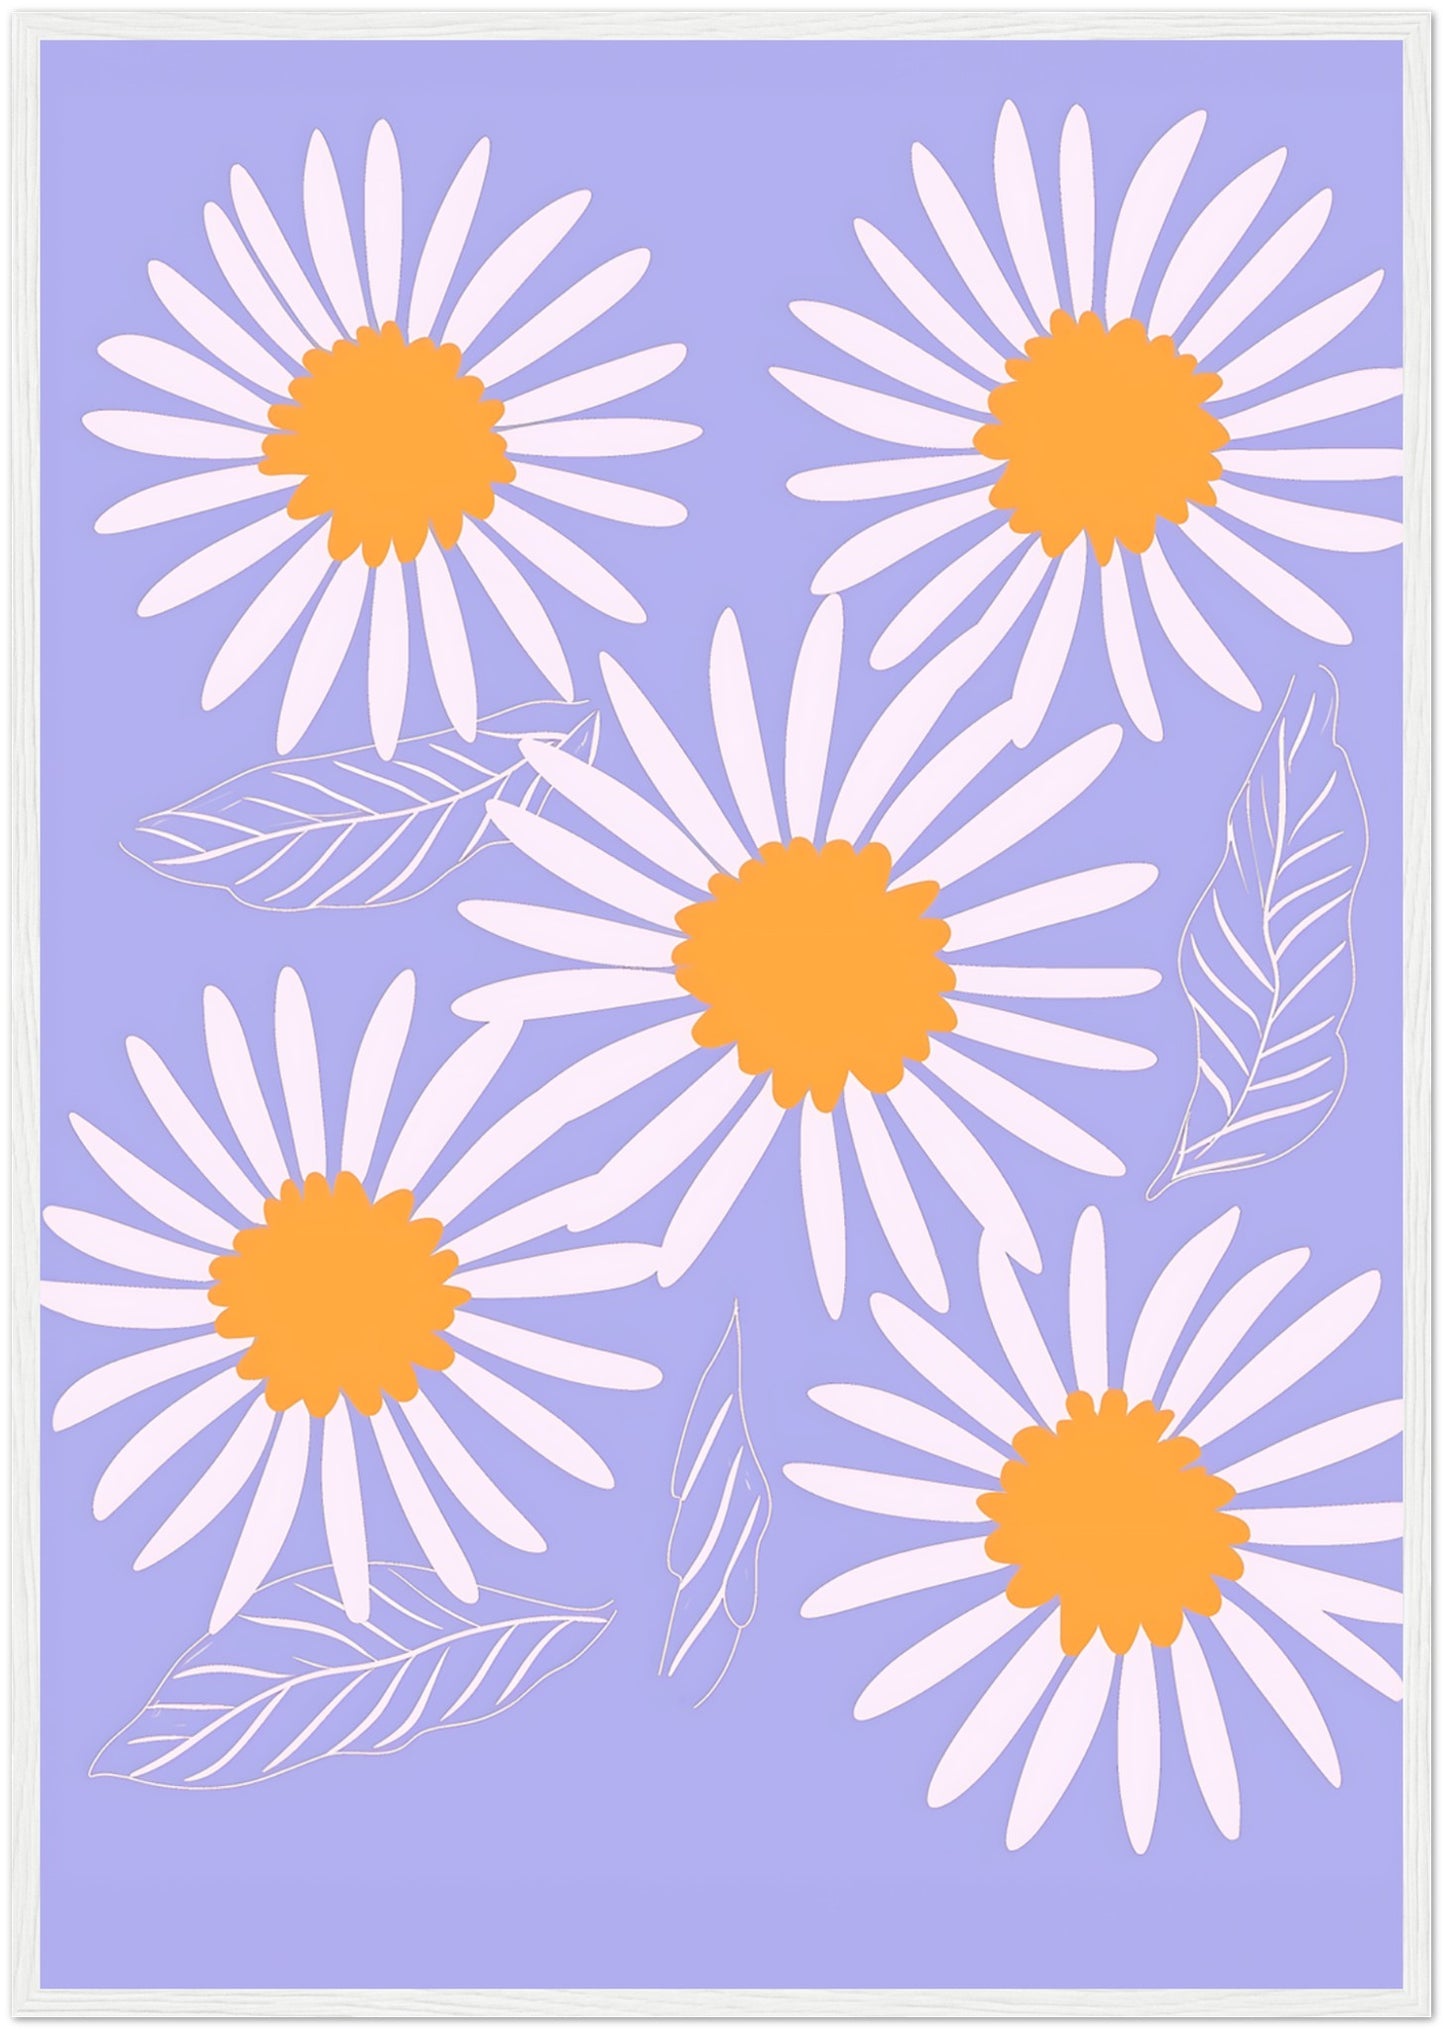 A framed illustration of white daisies with orange centers on a blue background.